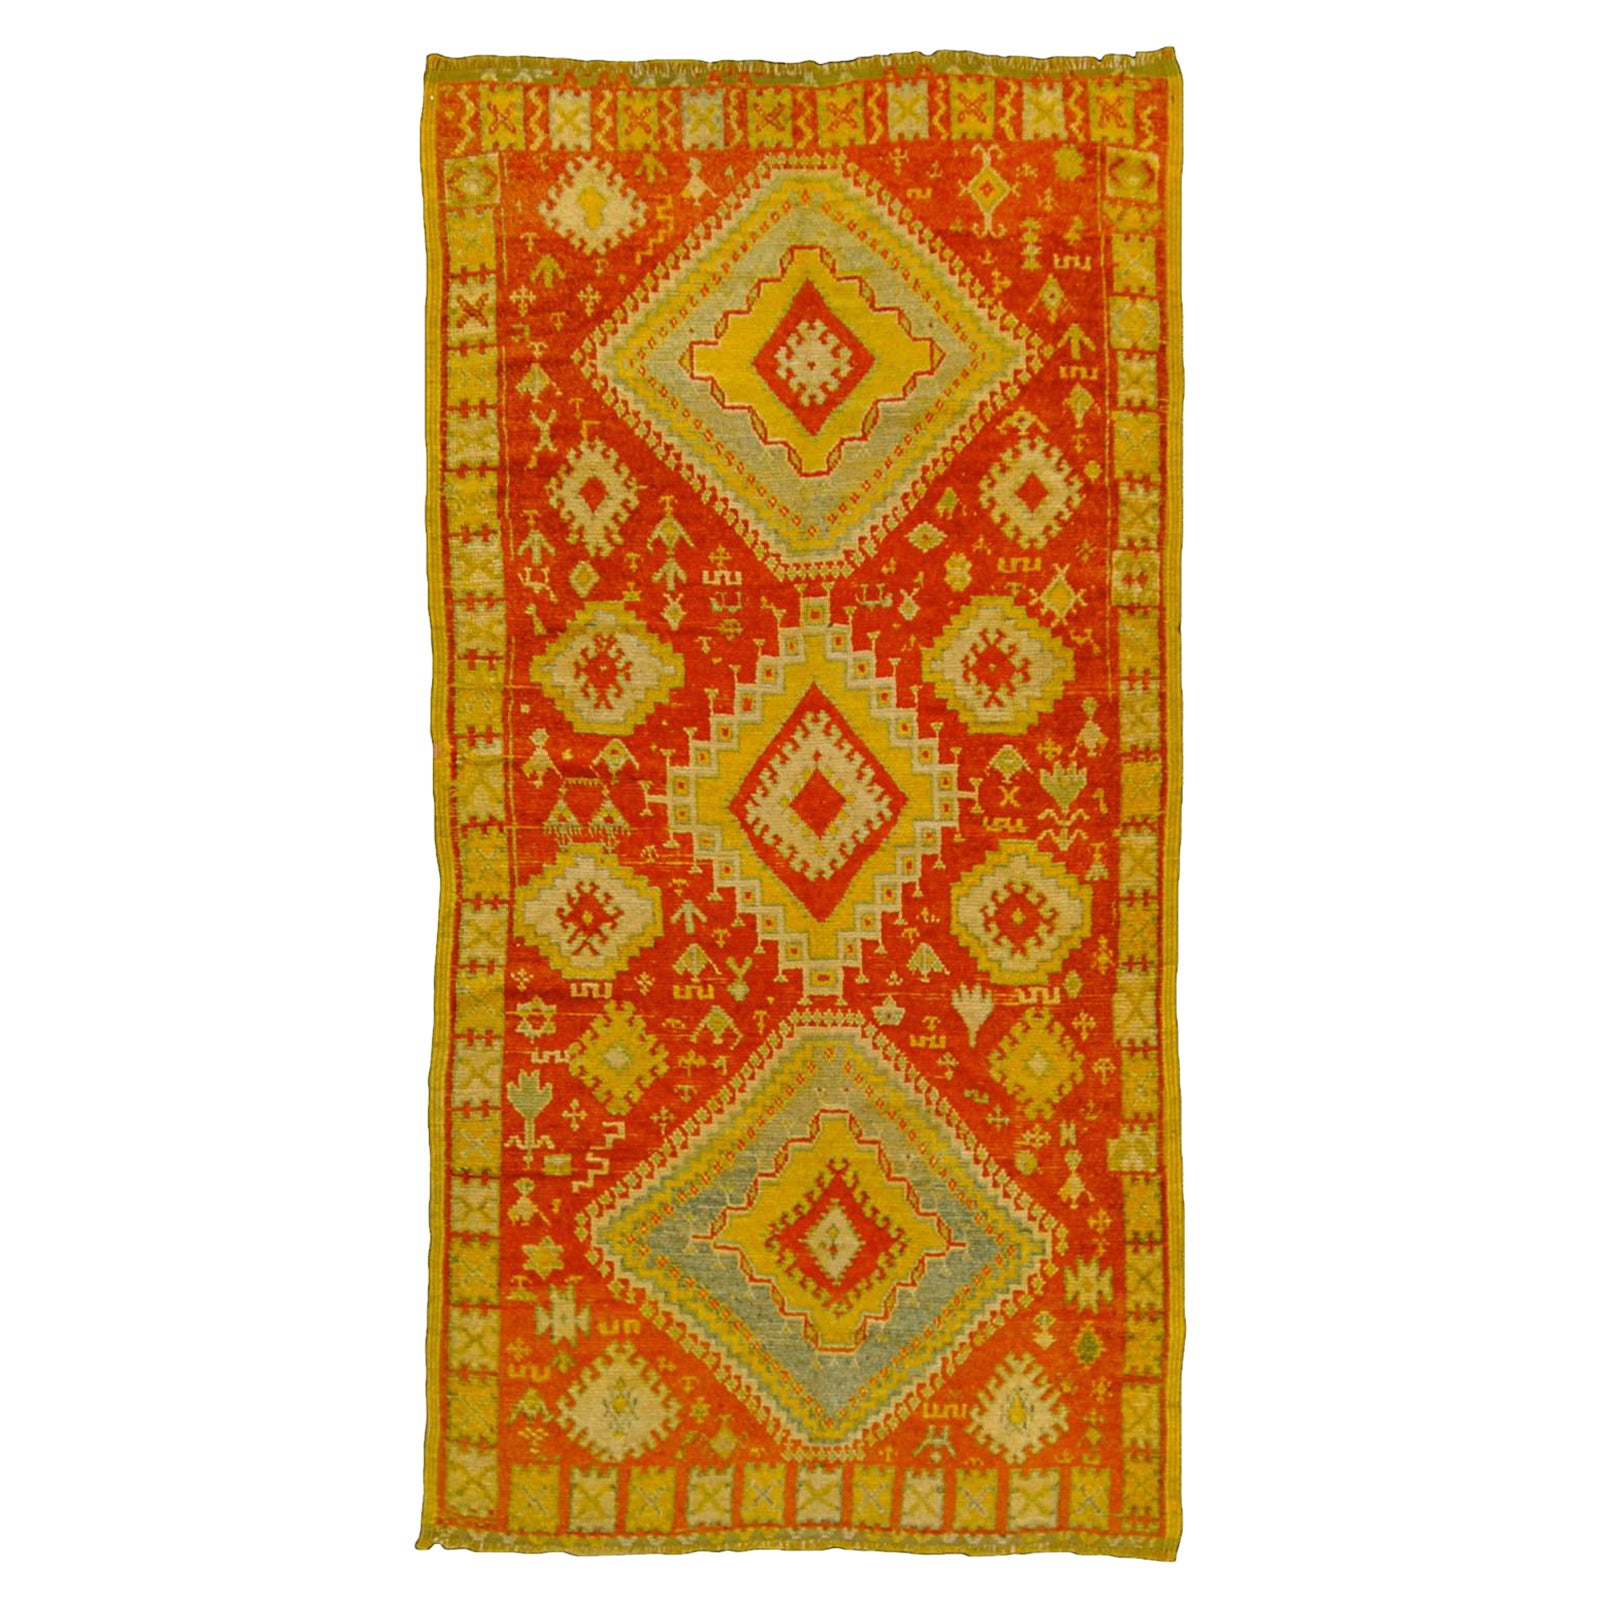 Berber carpet of old manufacture "Taznakht" red and saffron yellow field